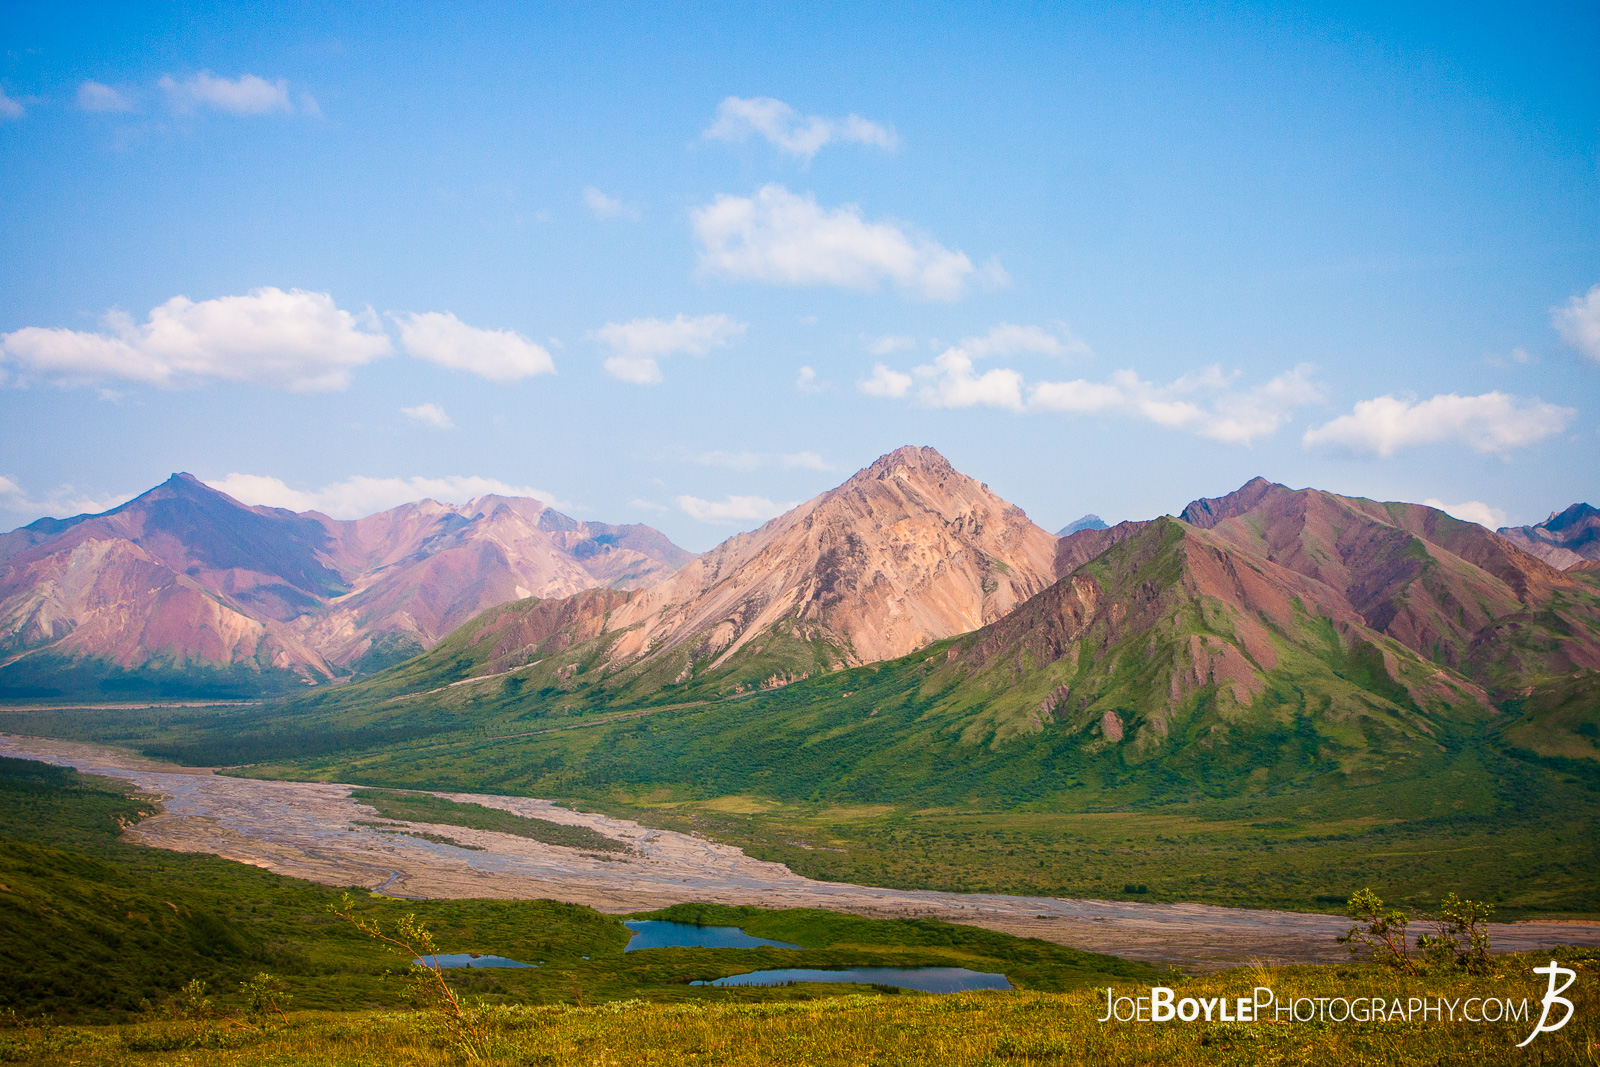  During our trip to Alaska, my buddy and I made a visit to Denali National Park. We spent some time in the backcountry where their are no trails and no man made markers of any kind. We had a map and a compass to navigate where we wanted to go. I must say hiking in Denali National Park was some of the hardest hiking I have ever done in my life! I always knew that trails made it easier but I never realized just how much easier! I am so thankful for people who work and volunteer to maintain trails in all our parks! That said, I'm also very thankful for the remoteness and untouched land in Denali National Park, Alaska. It has a different feel and honestly made me appreciate what we do have. Backpacking in Alaska made me realize a few things: 1) Things will simply take as long as they take and you can't rush them. 2) I appreciate civilization more and I understand why people "settle down". You don't want to be bushwhacking your whole life! 